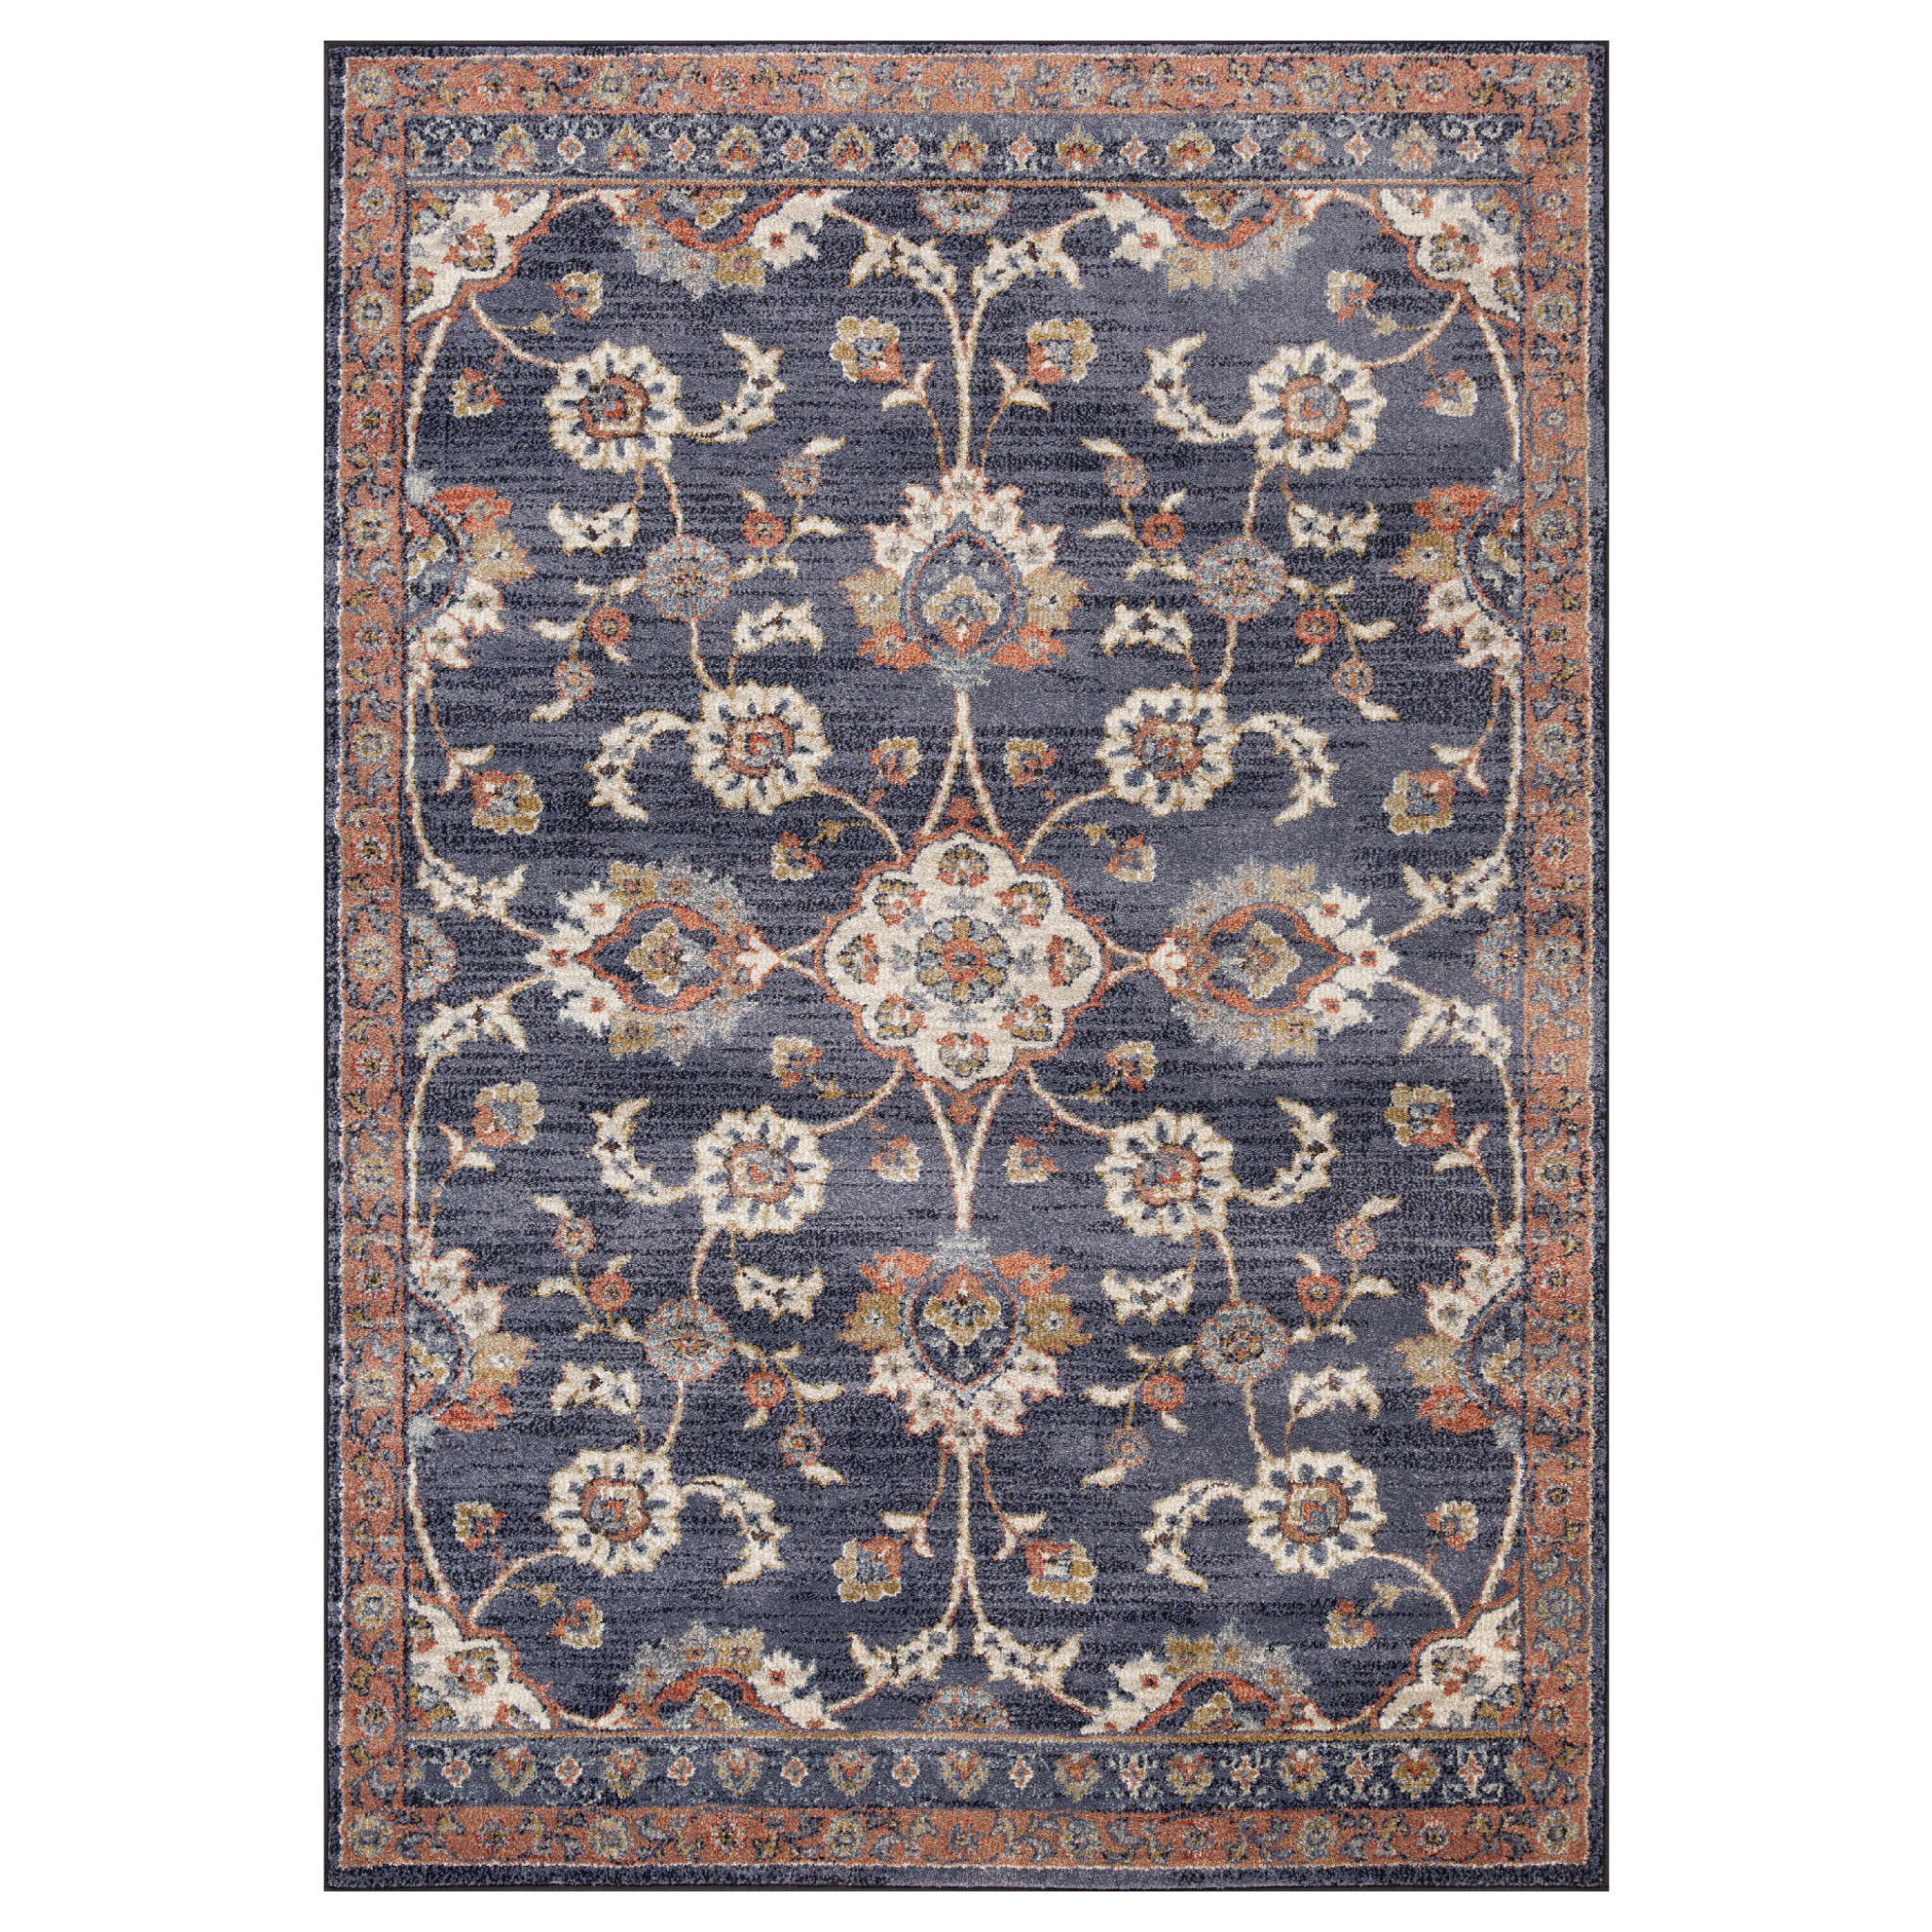 5' x 7' Navy Blue Floral Power Loom Area Rug With Fringe-532155-1